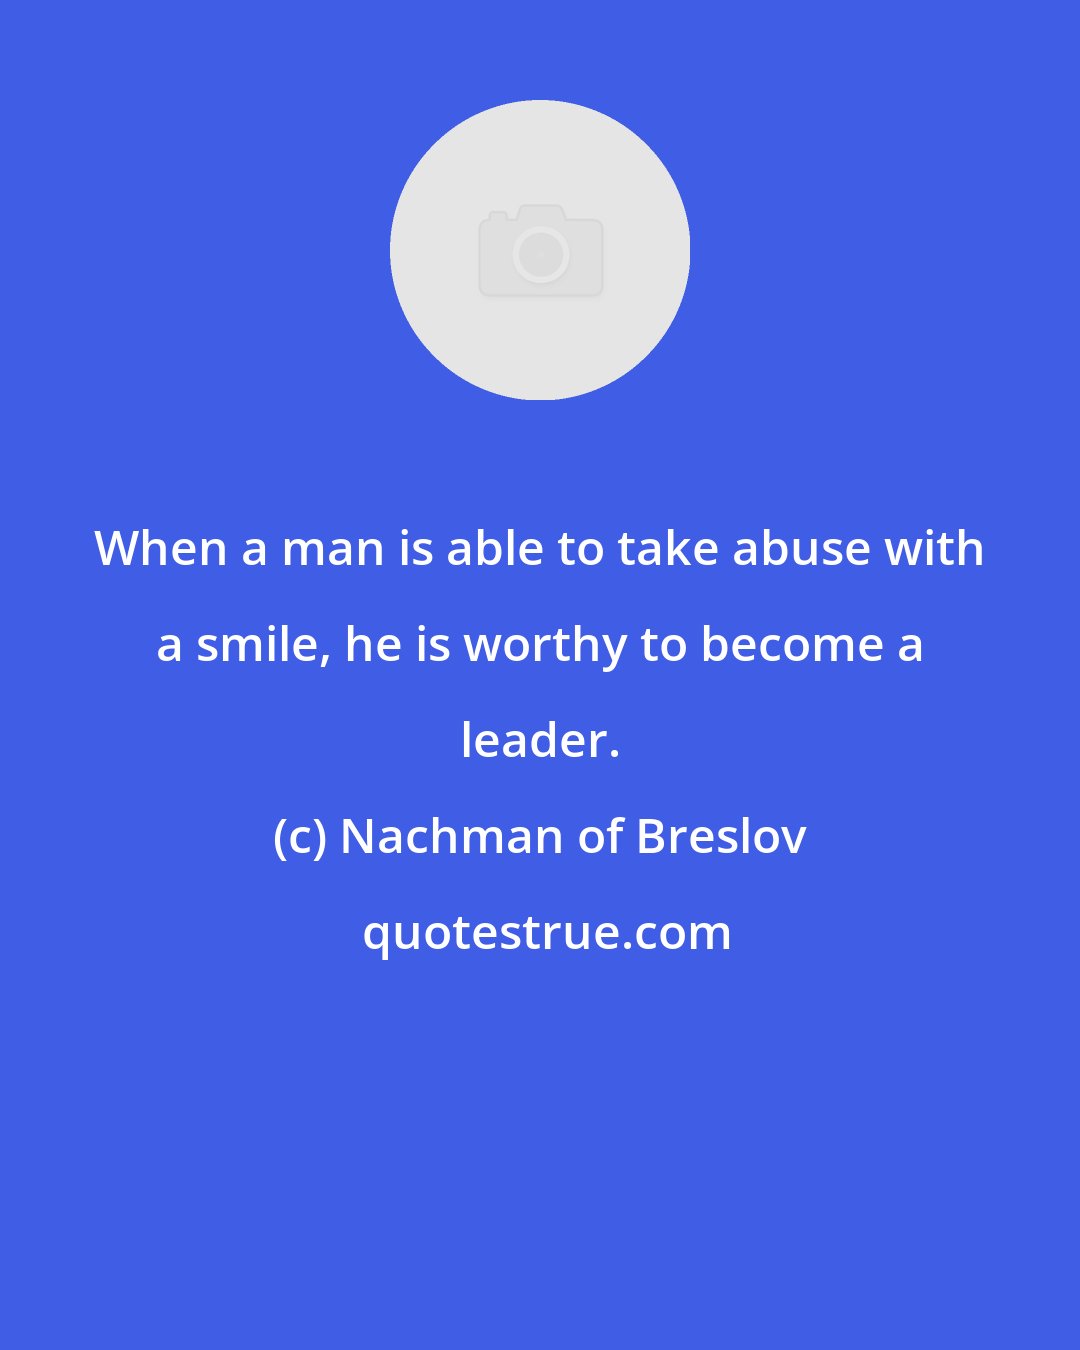 Nachman of Breslov: When a man is able to take abuse with a smile, he is worthy to become a leader.